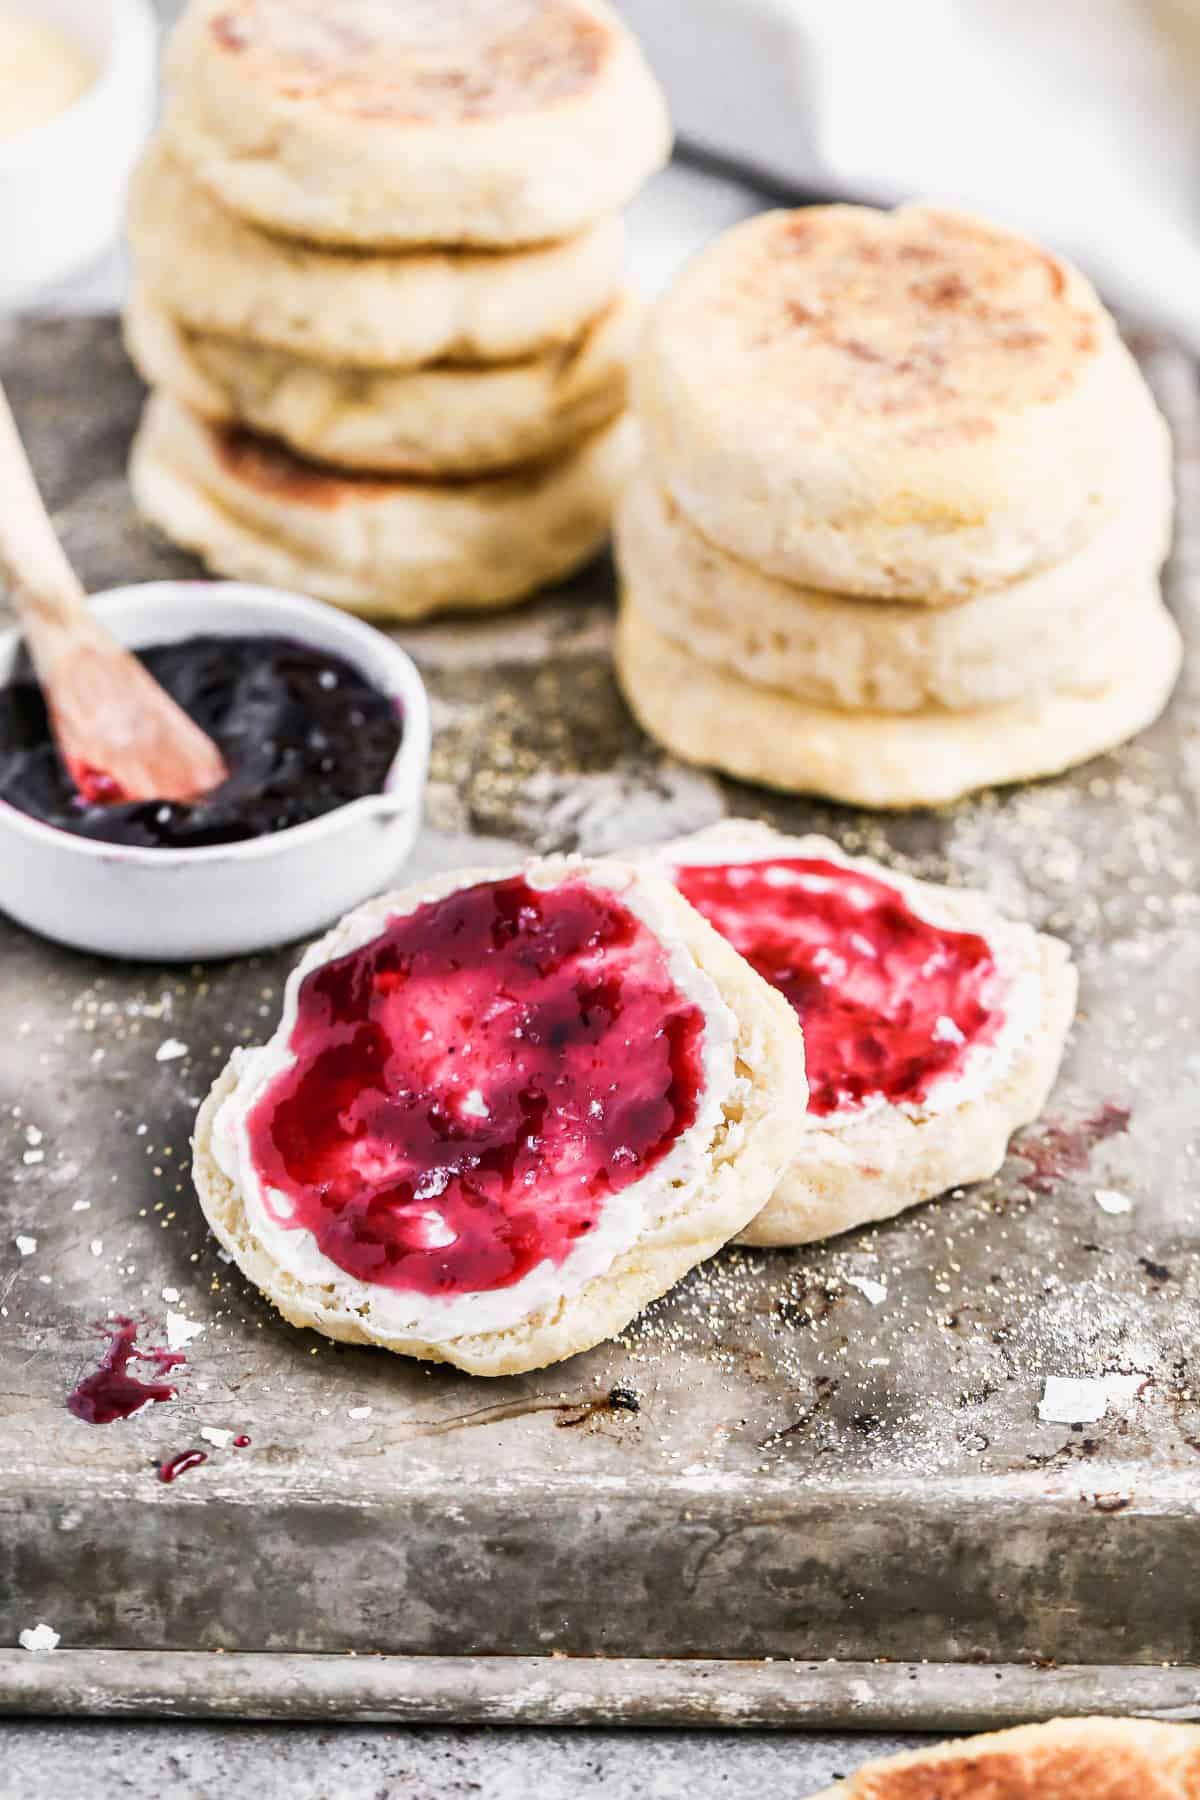 A homemade English Muffin split in half and spread with butter and jam, with a stack of more english muffins behind.